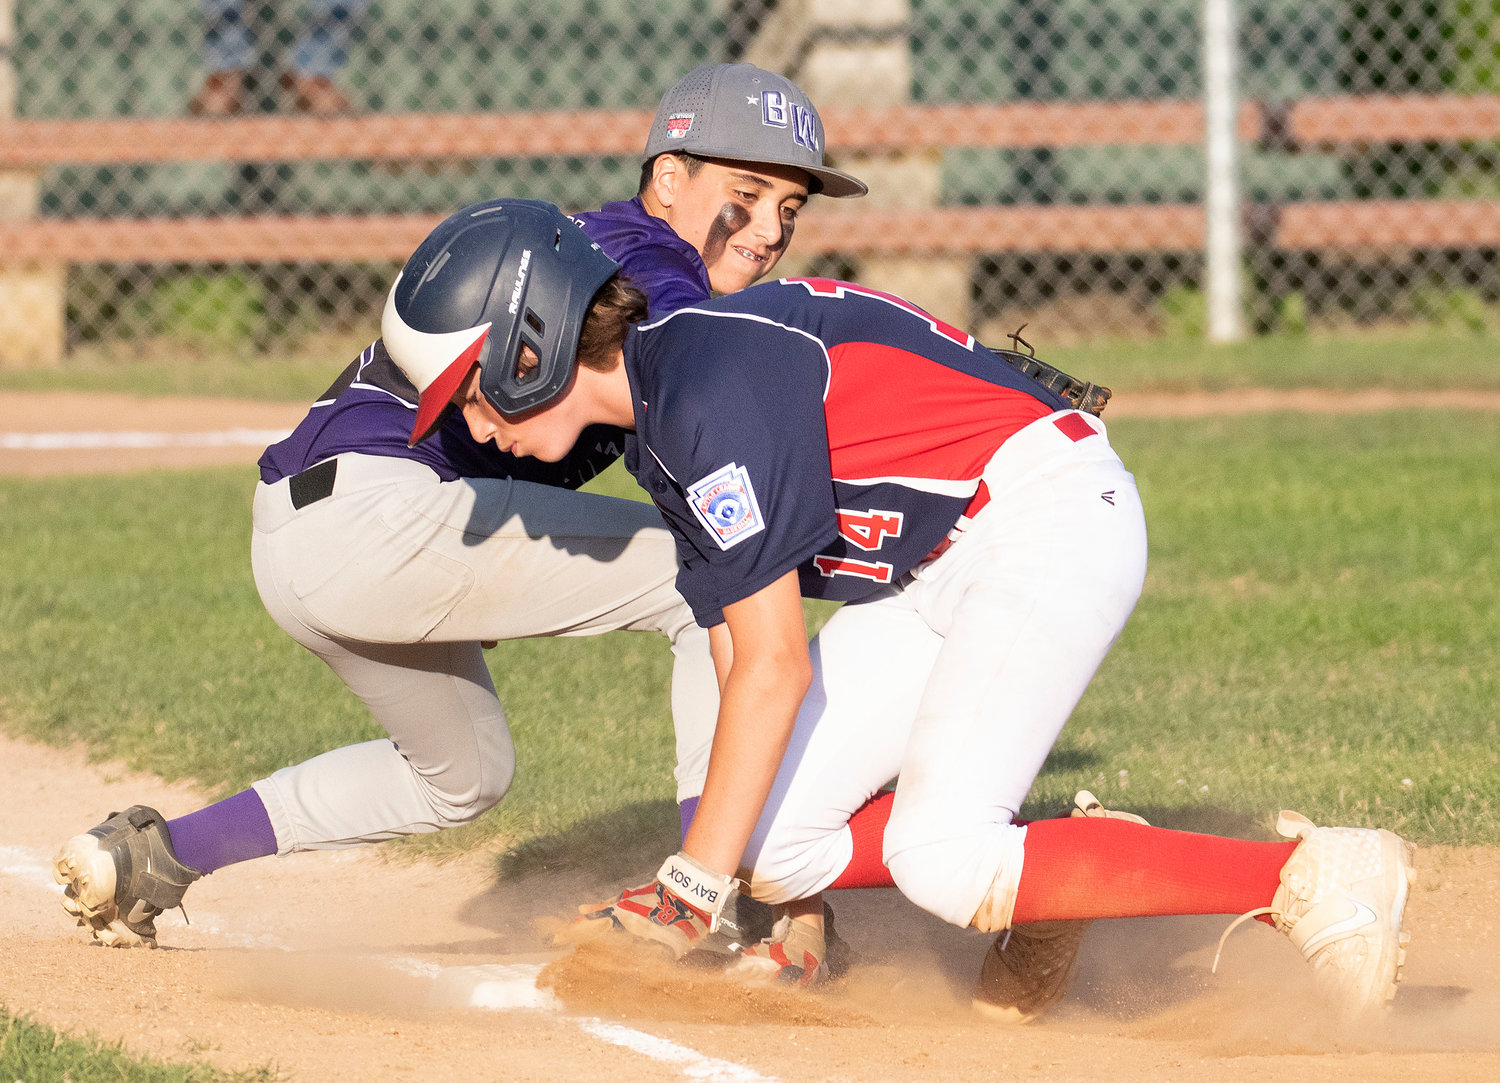 Kevin Casey puts the tag on Ben Humm during a pick off attempt. Humm was safe on the play.